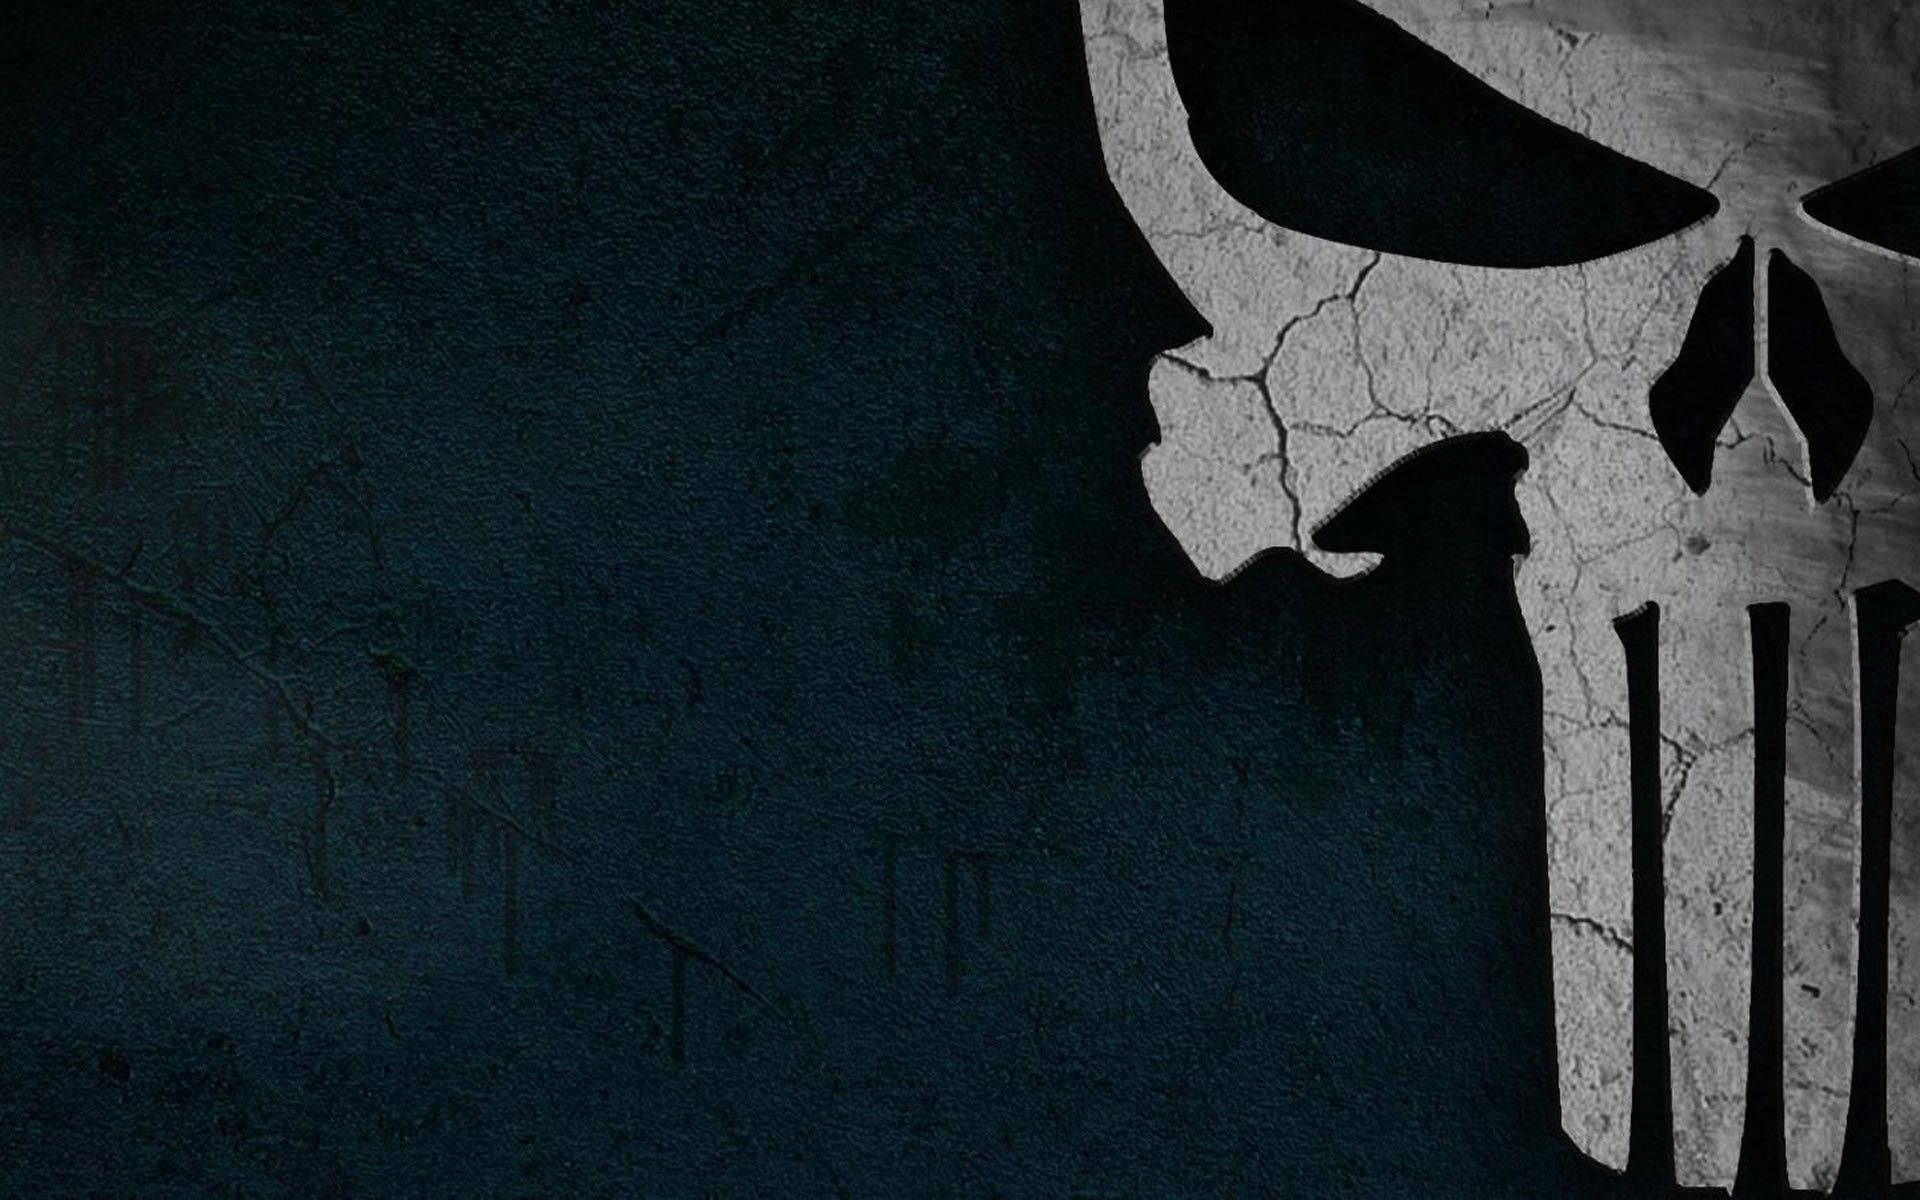 "The Punisher's iconic skull logo stands out boldly against a teal background" Wallpaper